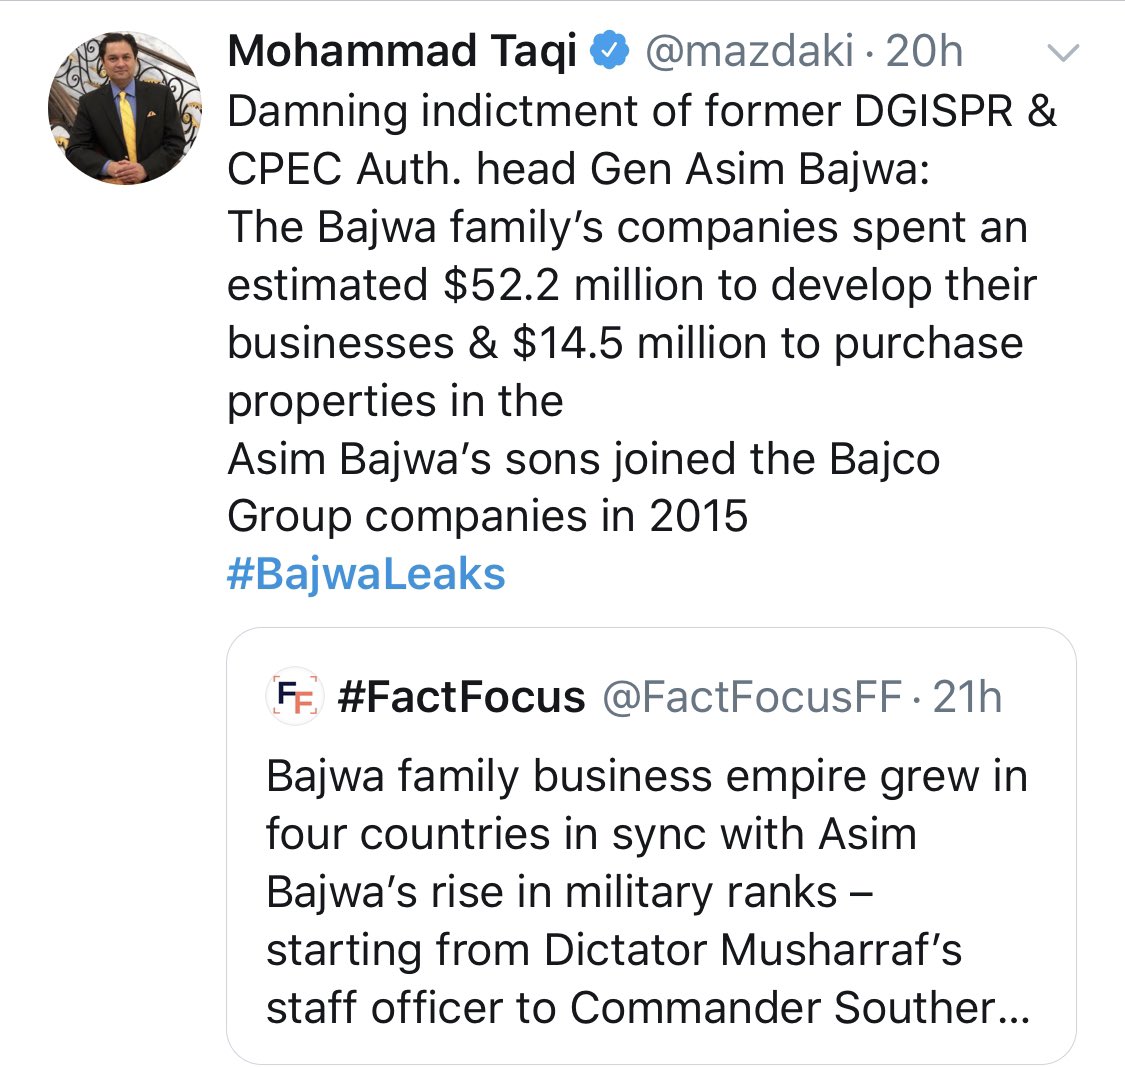 Now let’s look at how they link Gen Asim Bajwa to these Pizza shops:Story makes a ridiculous claim & leaves it for others to figure it out.The claim is that Gen Bajwa used his position to build an “secret empire” of Pizza franchises, let’s see how frivolous the claim is:/6